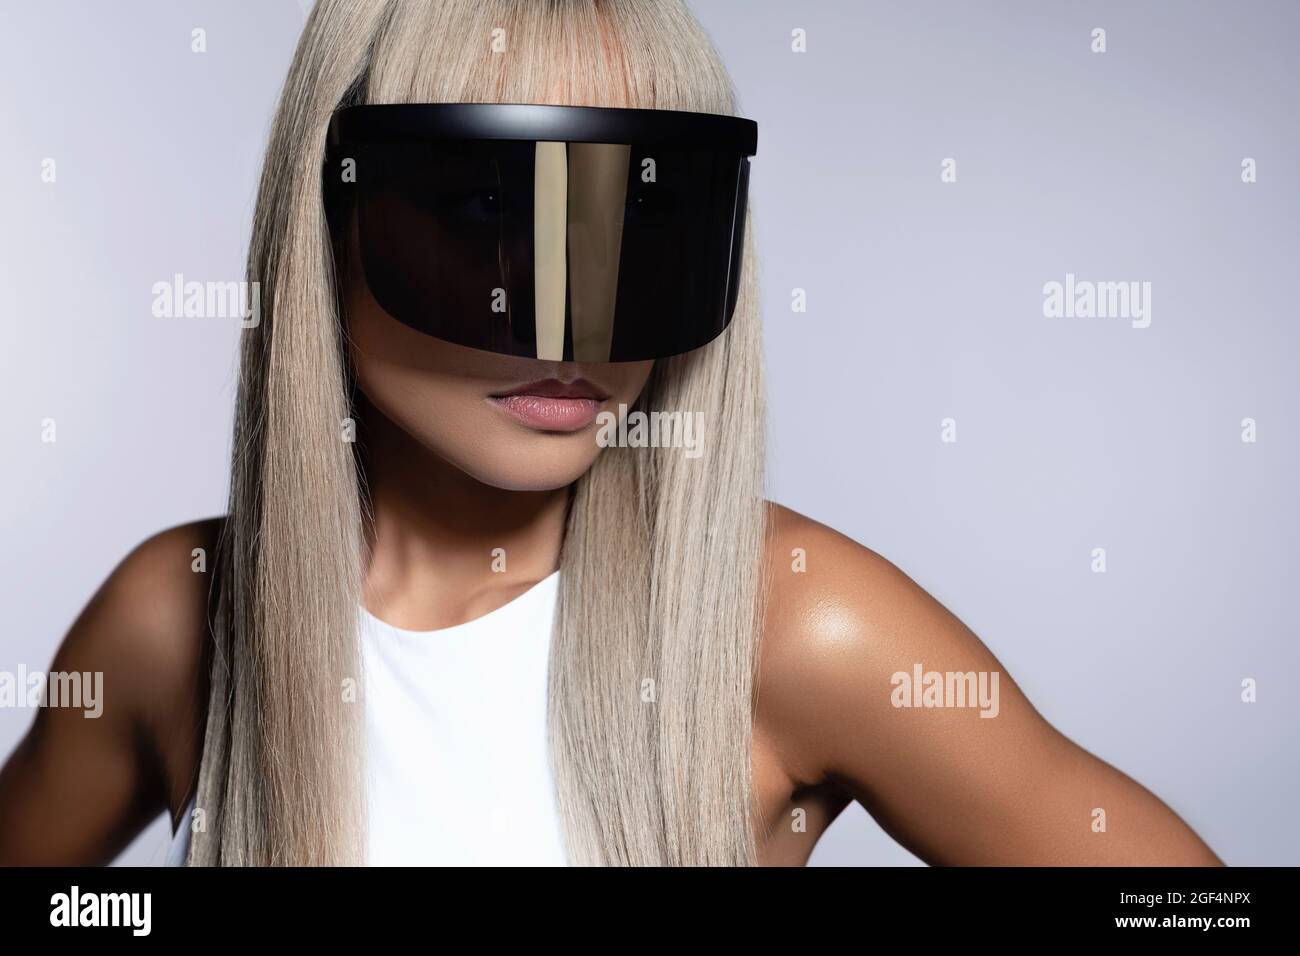 Woman with dyed hair wearing black visor glasses against white background Stock Photo